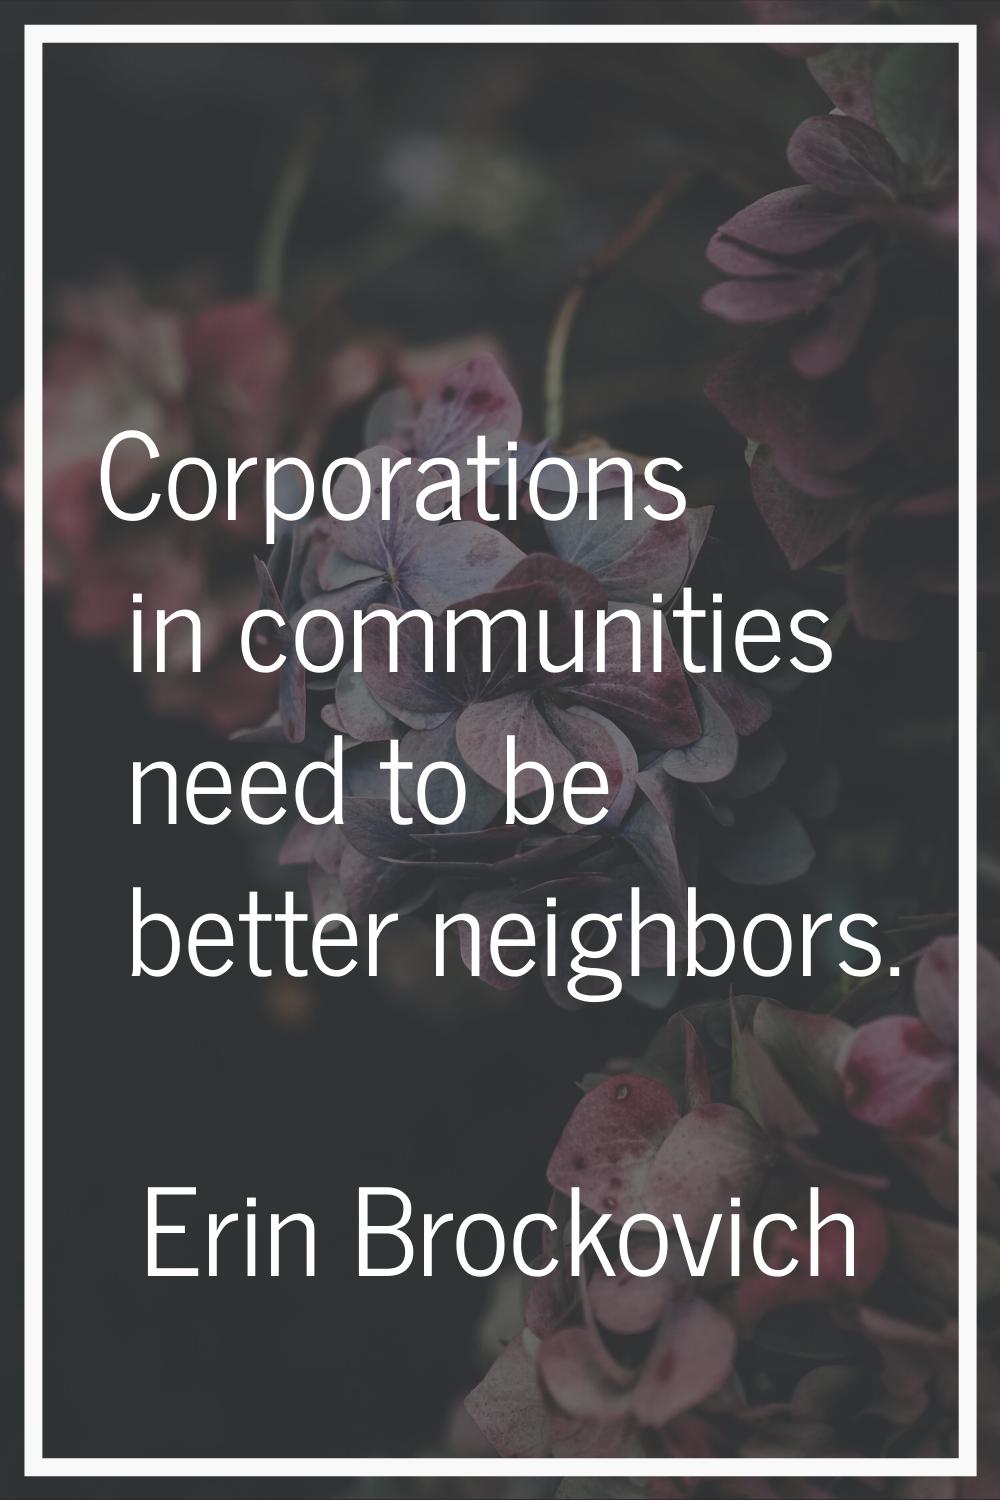 Corporations in communities need to be better neighbors.